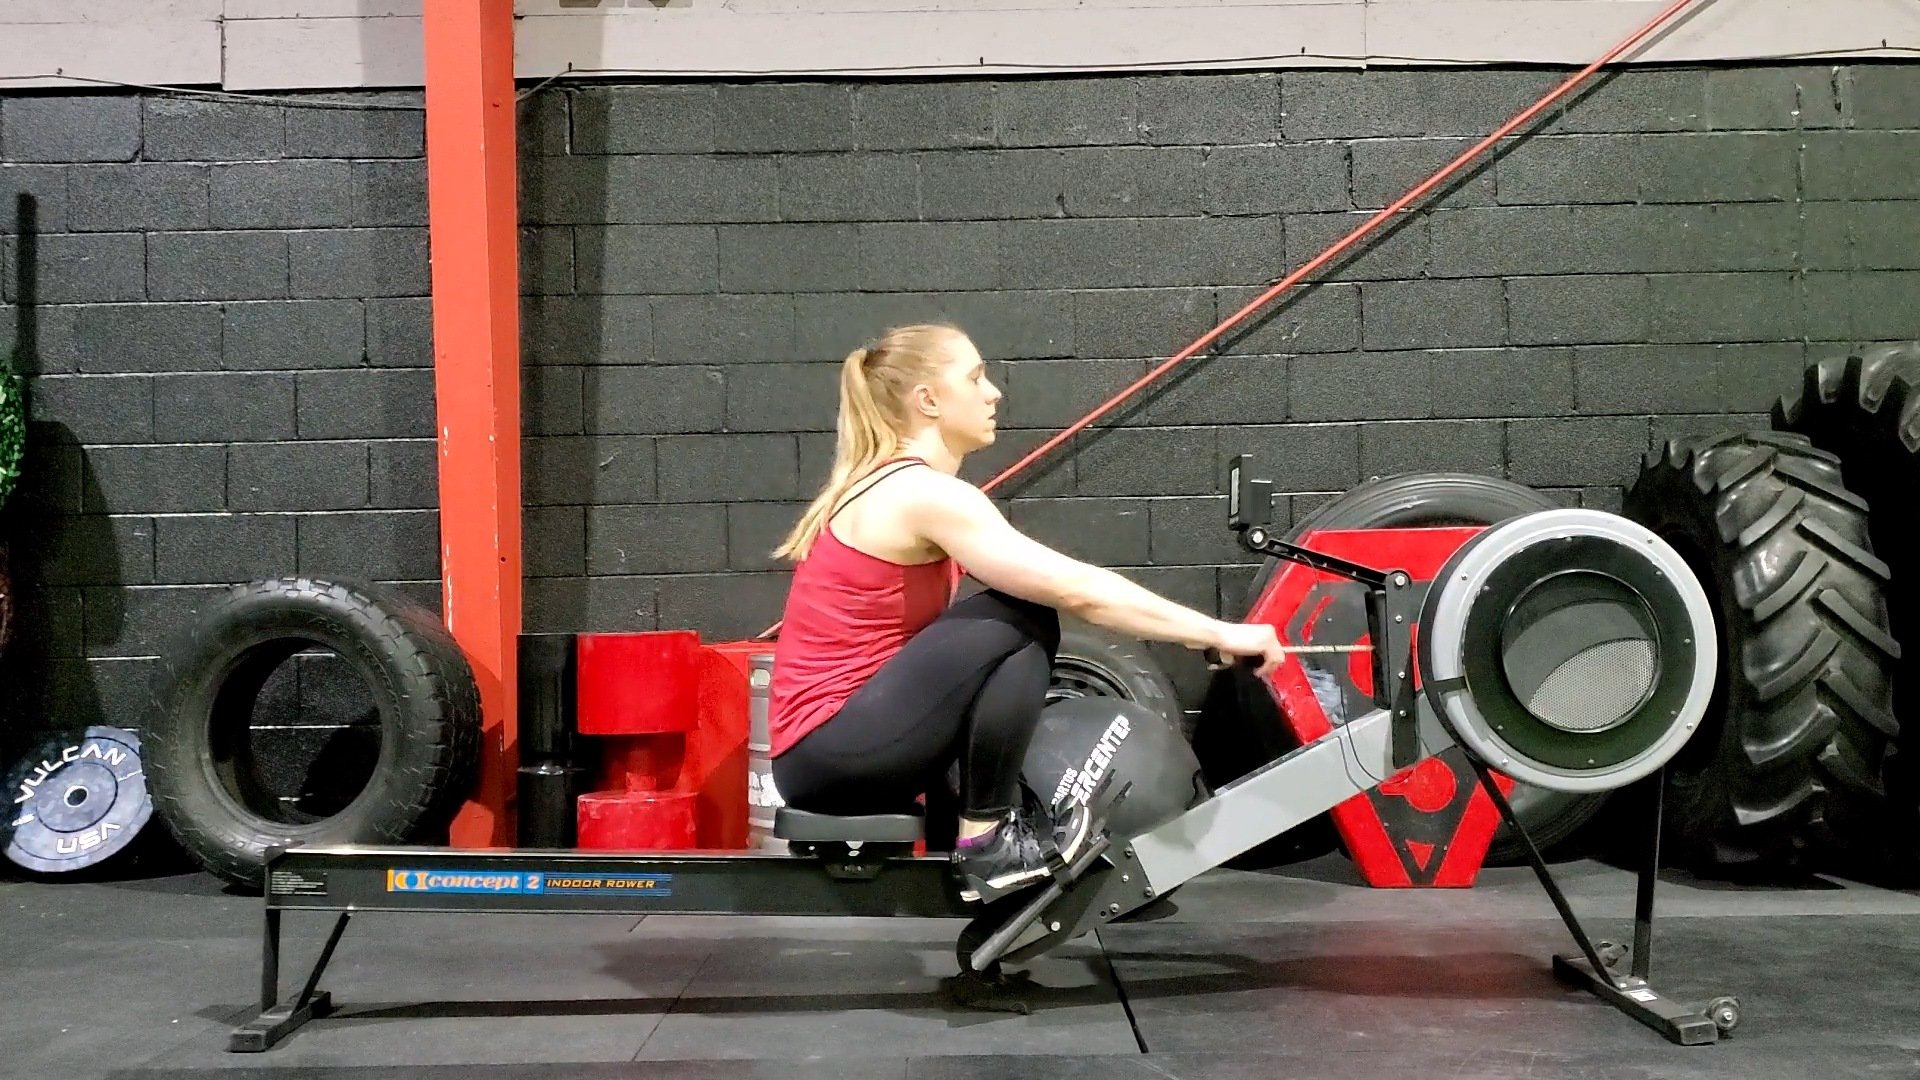 rowing machine catch position - How to Use a Rowing Machine (3 Workouts)